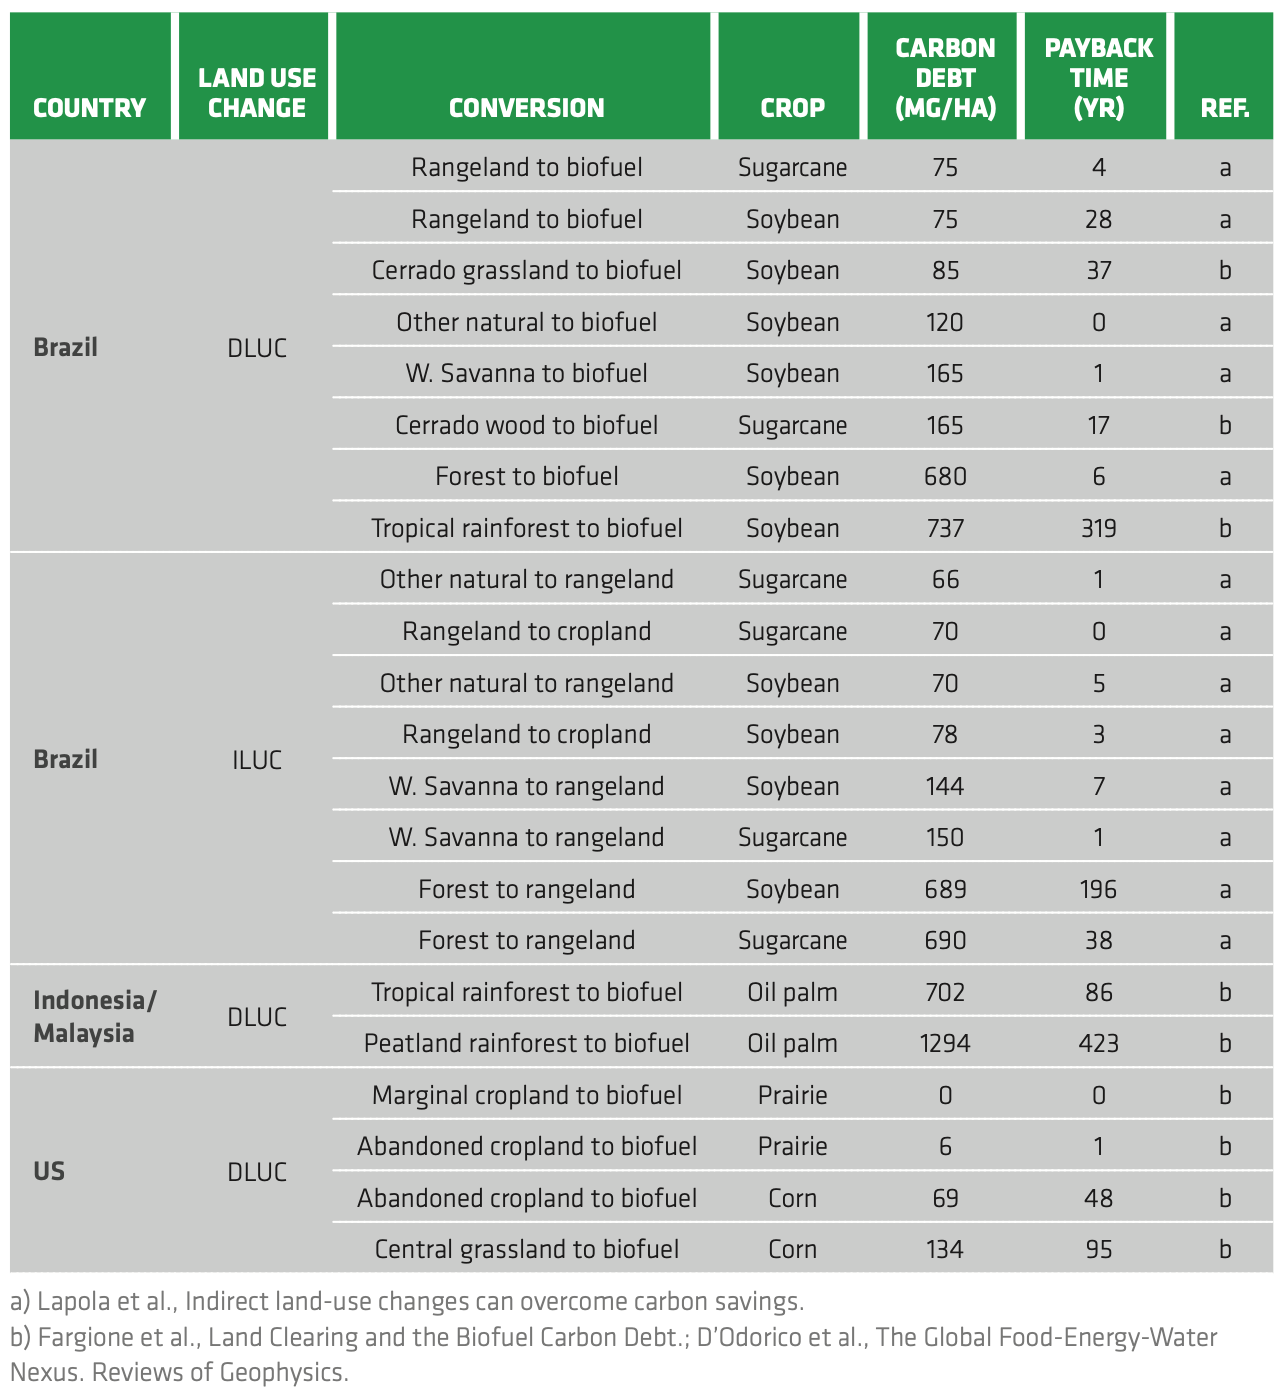 TABLE 3.4 Carbon debt per unit area and payback time for direct and indirect land use change of different ecosystems in Brazil, Indonesia and Malaysia, and the U.S.